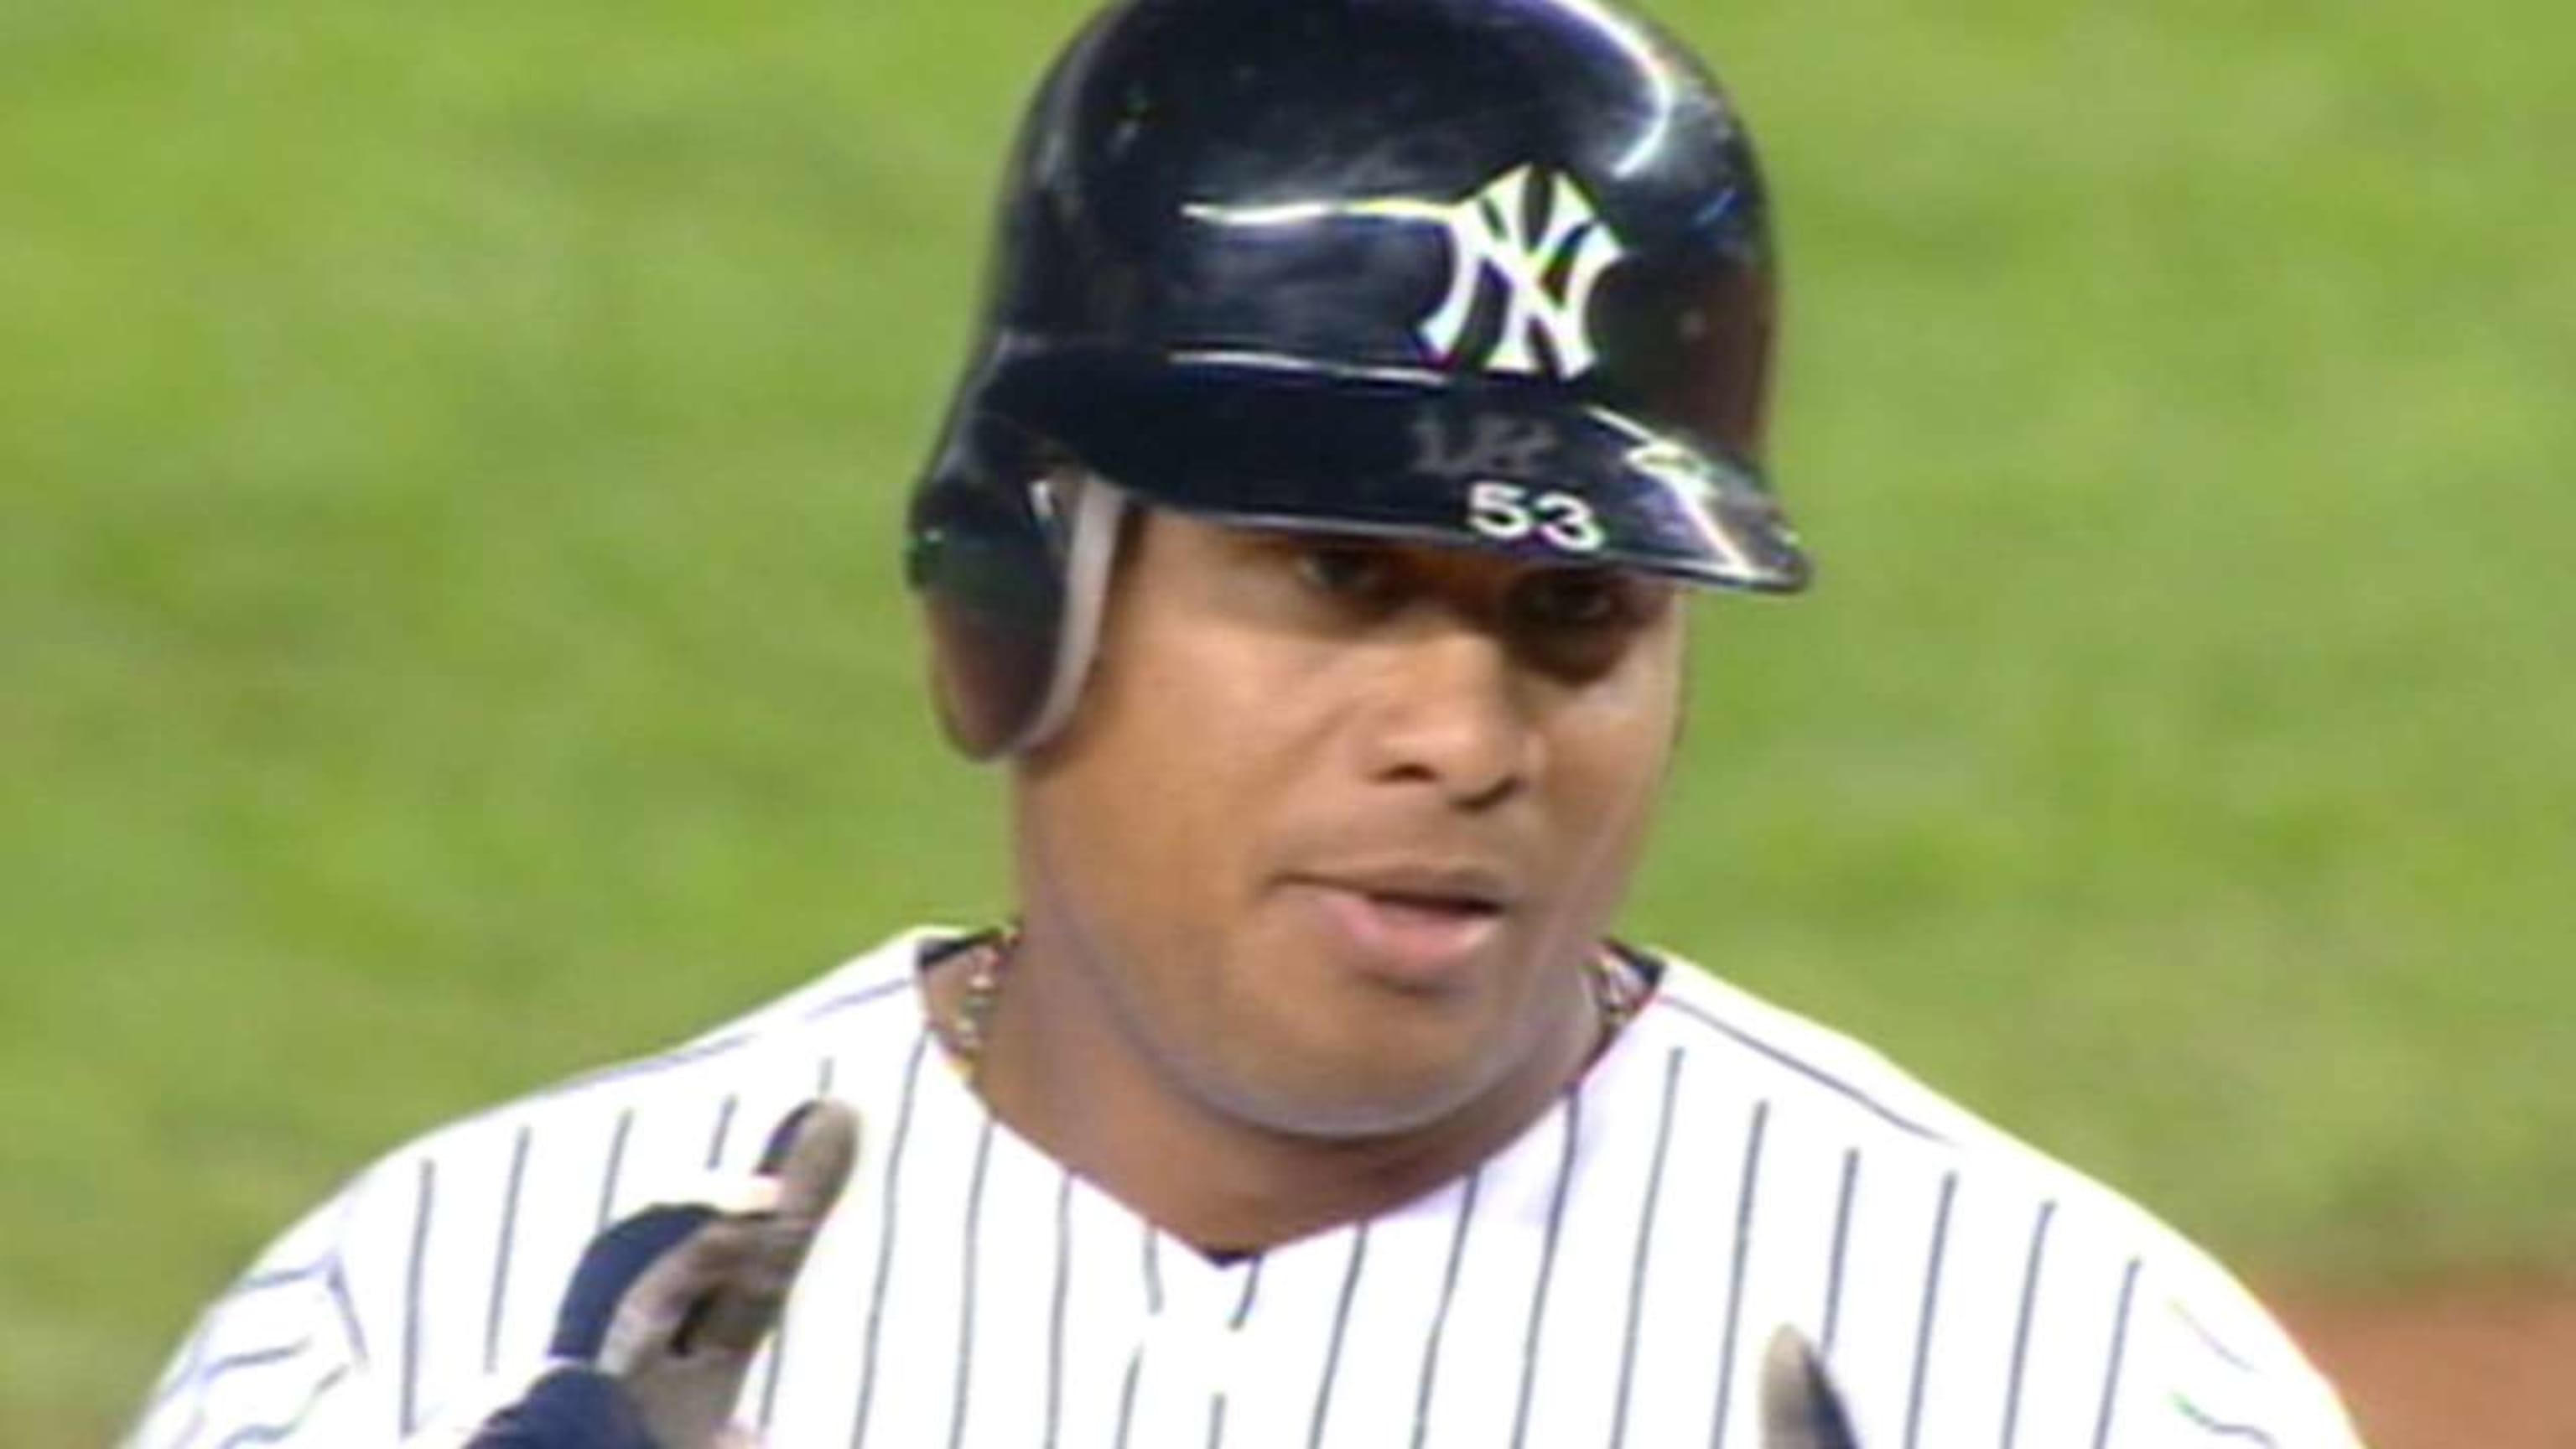 Don't Laugh: Bobby Abreu's Hall of Fame Case - Cooperstown Cred